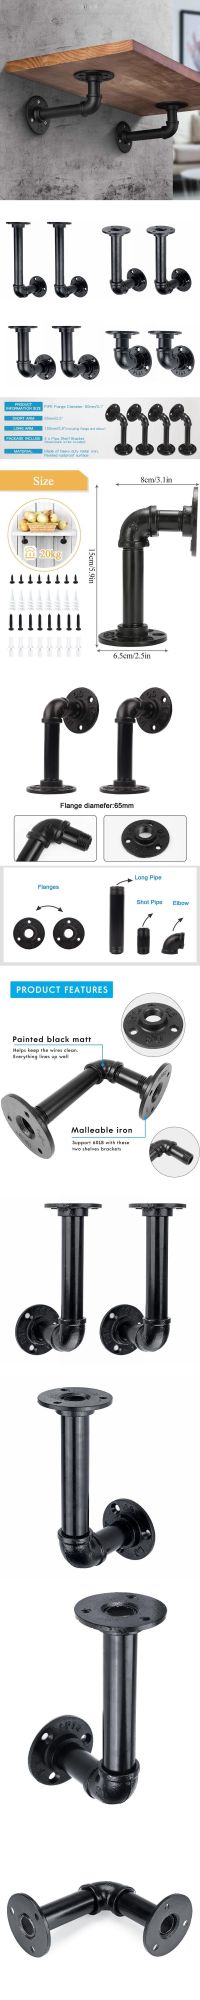 Black Malleable Iron 3/4" Home Bracket Pipe Fittings